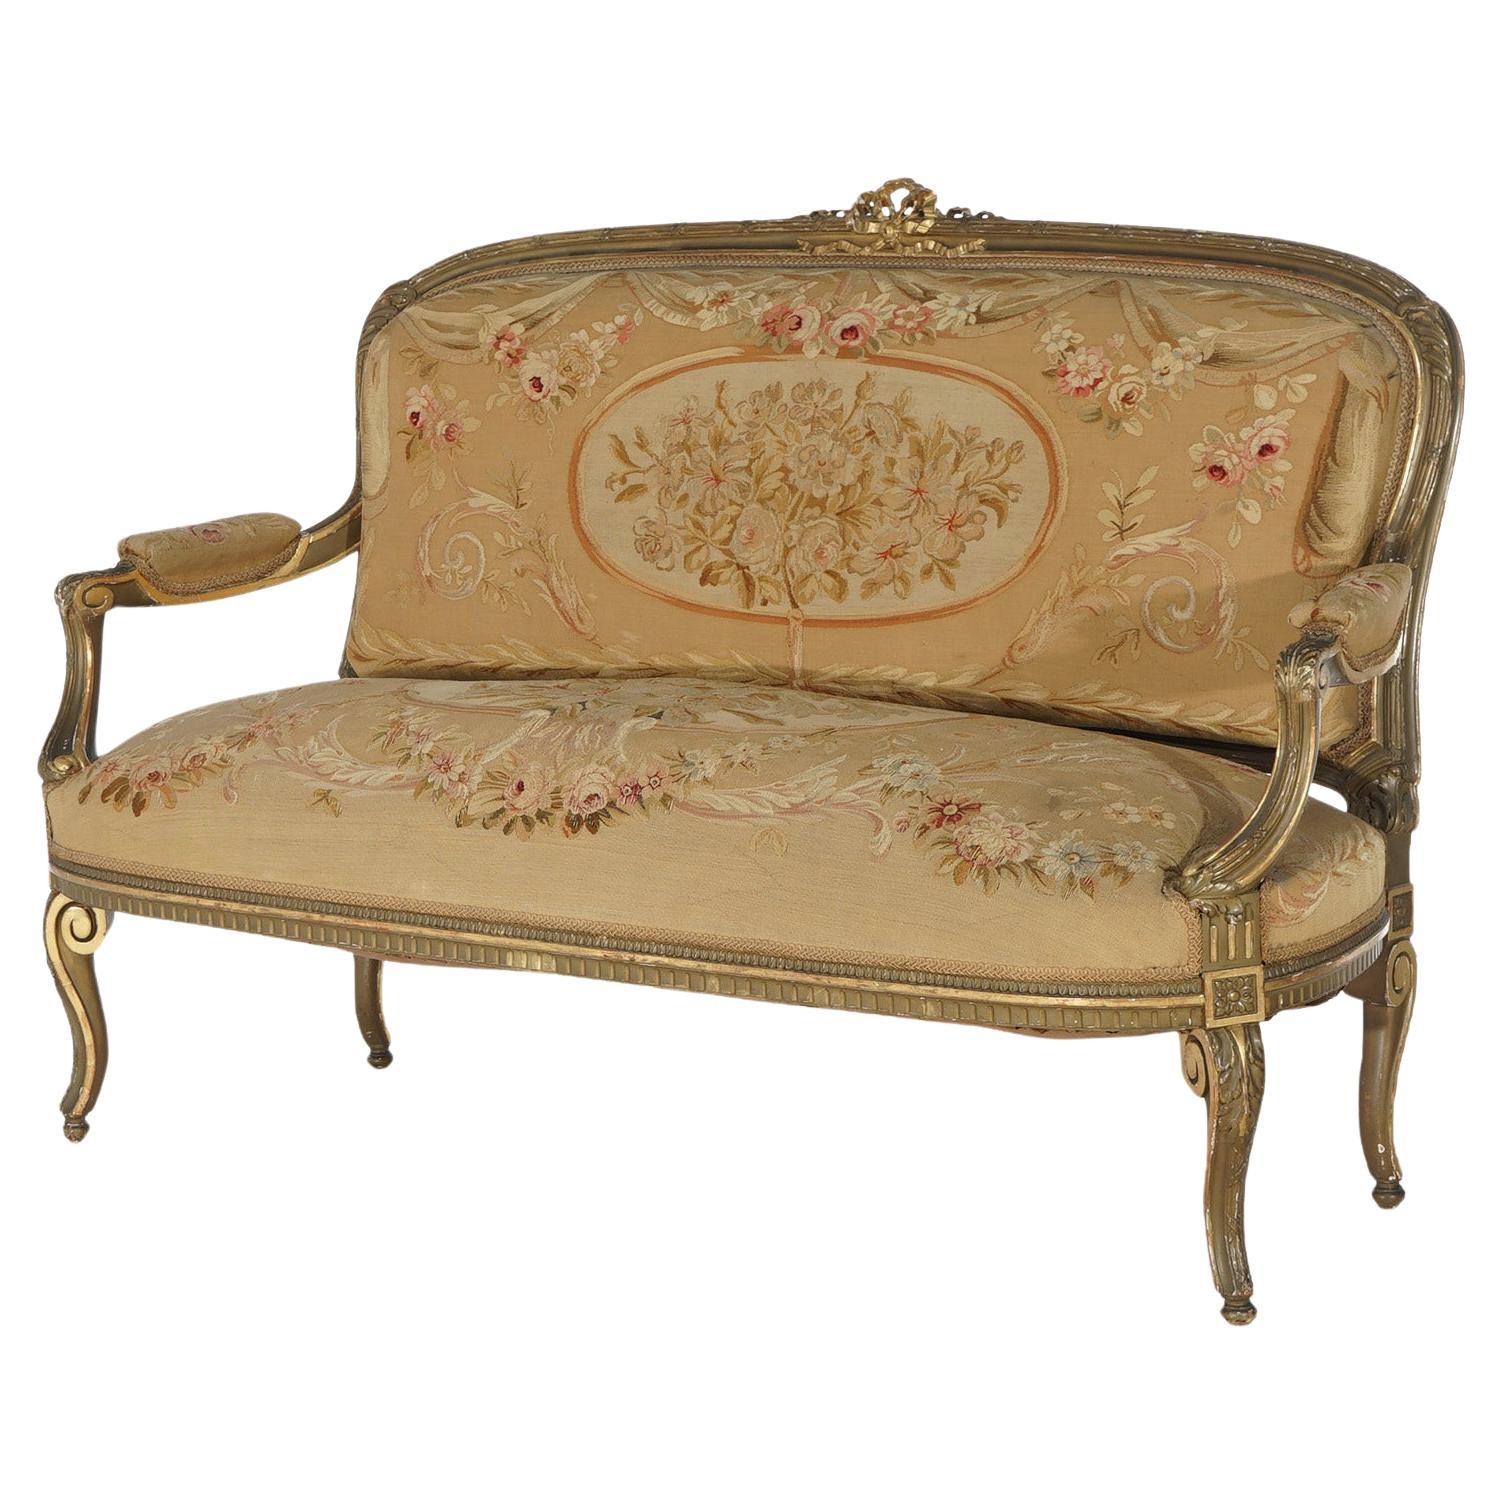 Antique French Louis XV Giltwood & Aubusson Tapestry Sofa C1860 For Sale